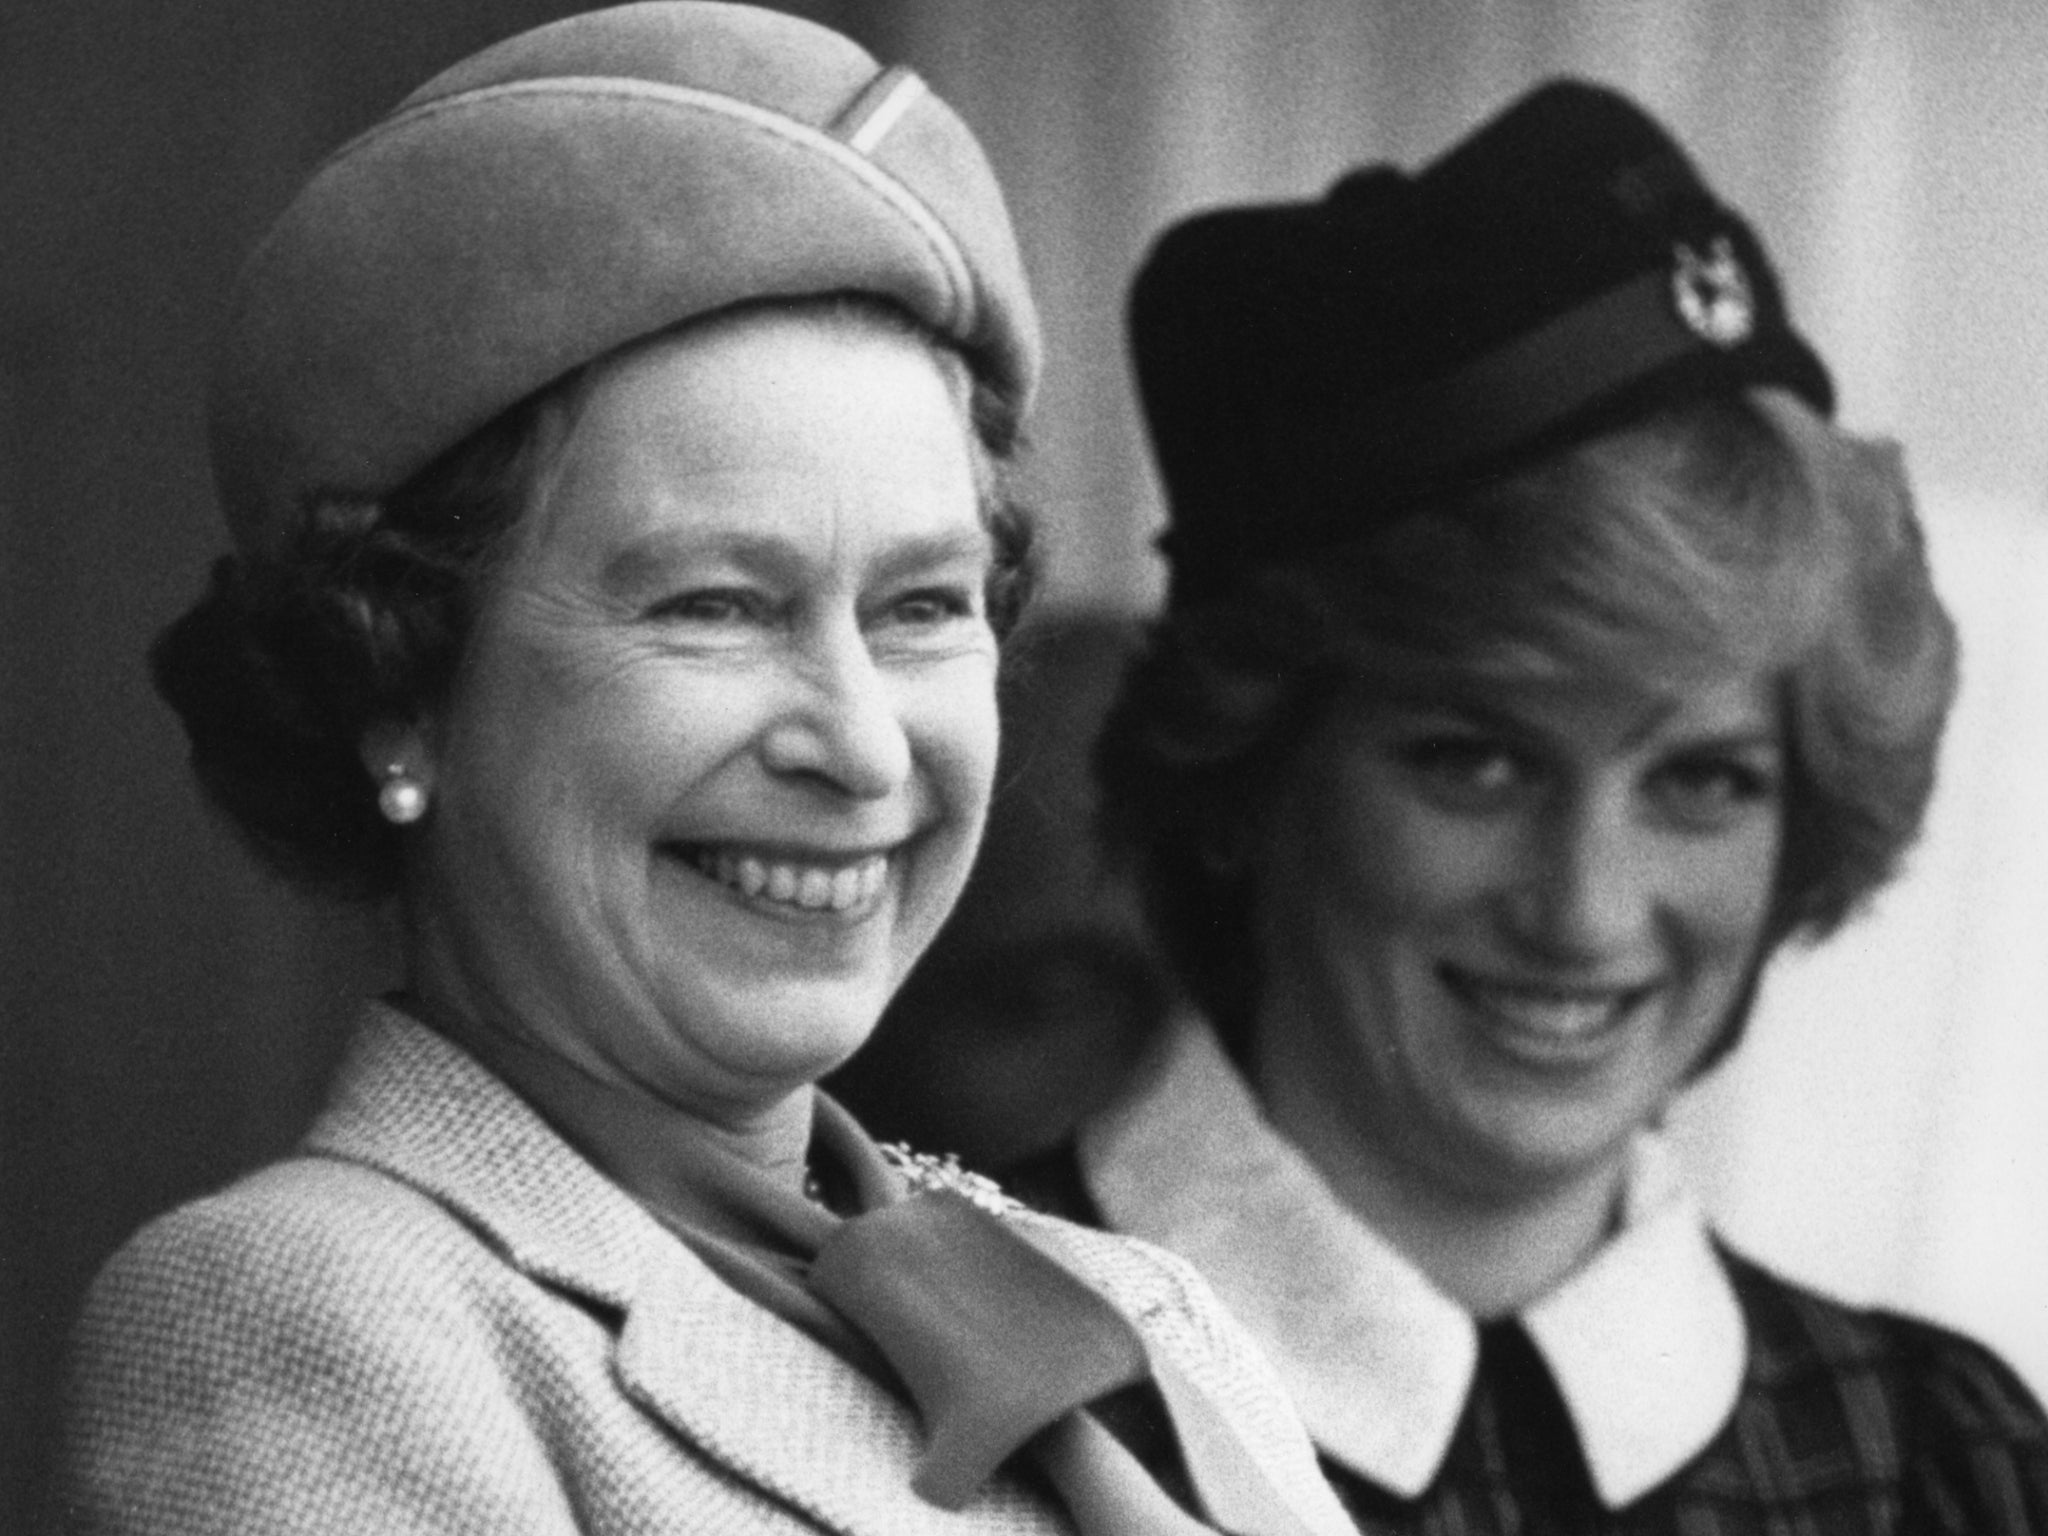 The Queen and Diana shared a ‘warm’ relationship